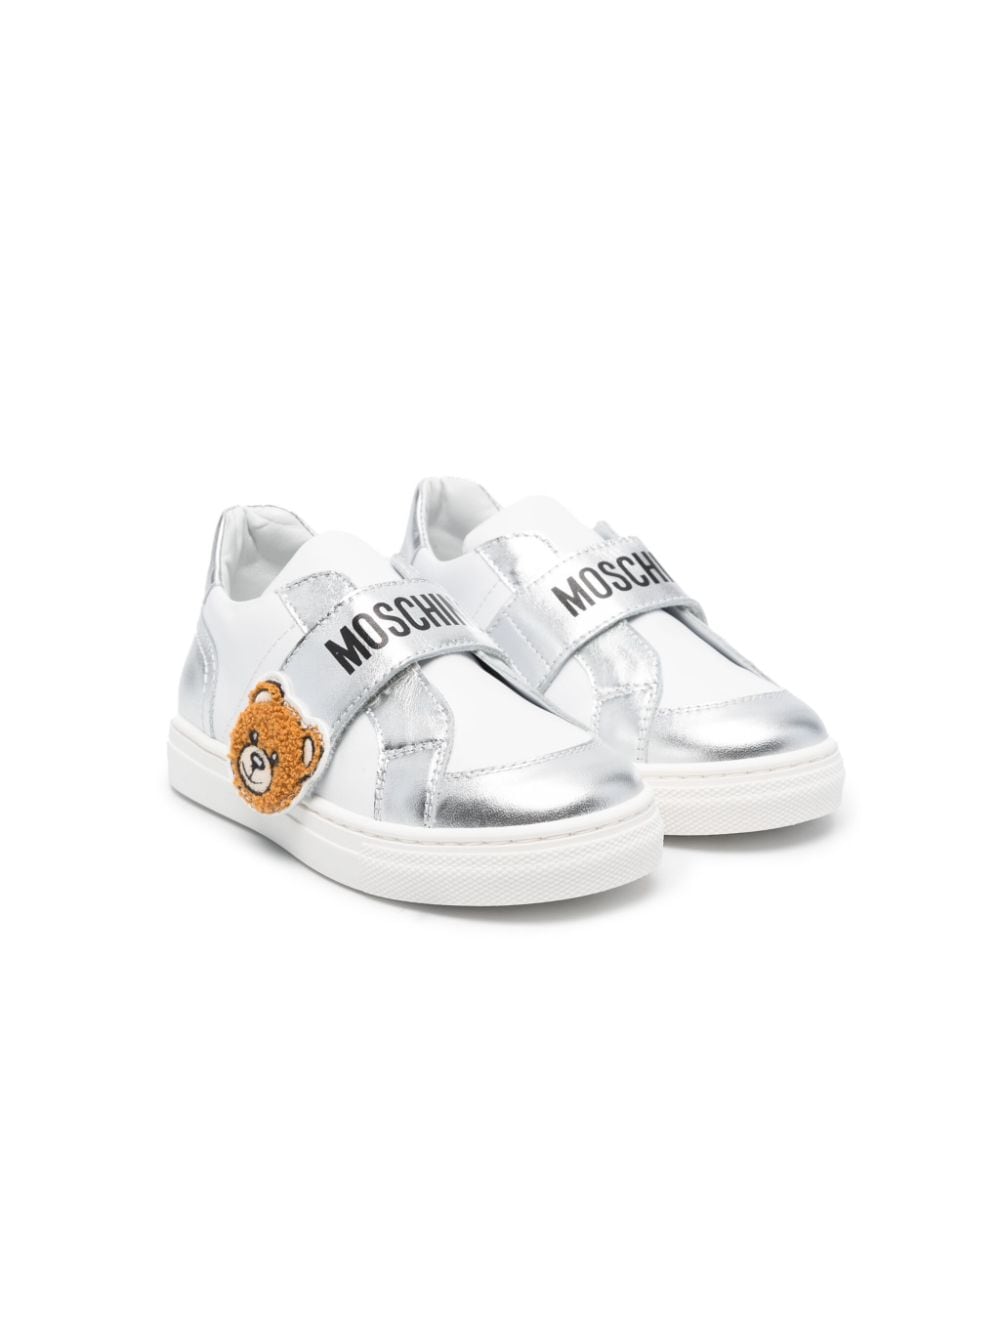 White and silver sneakers for girls